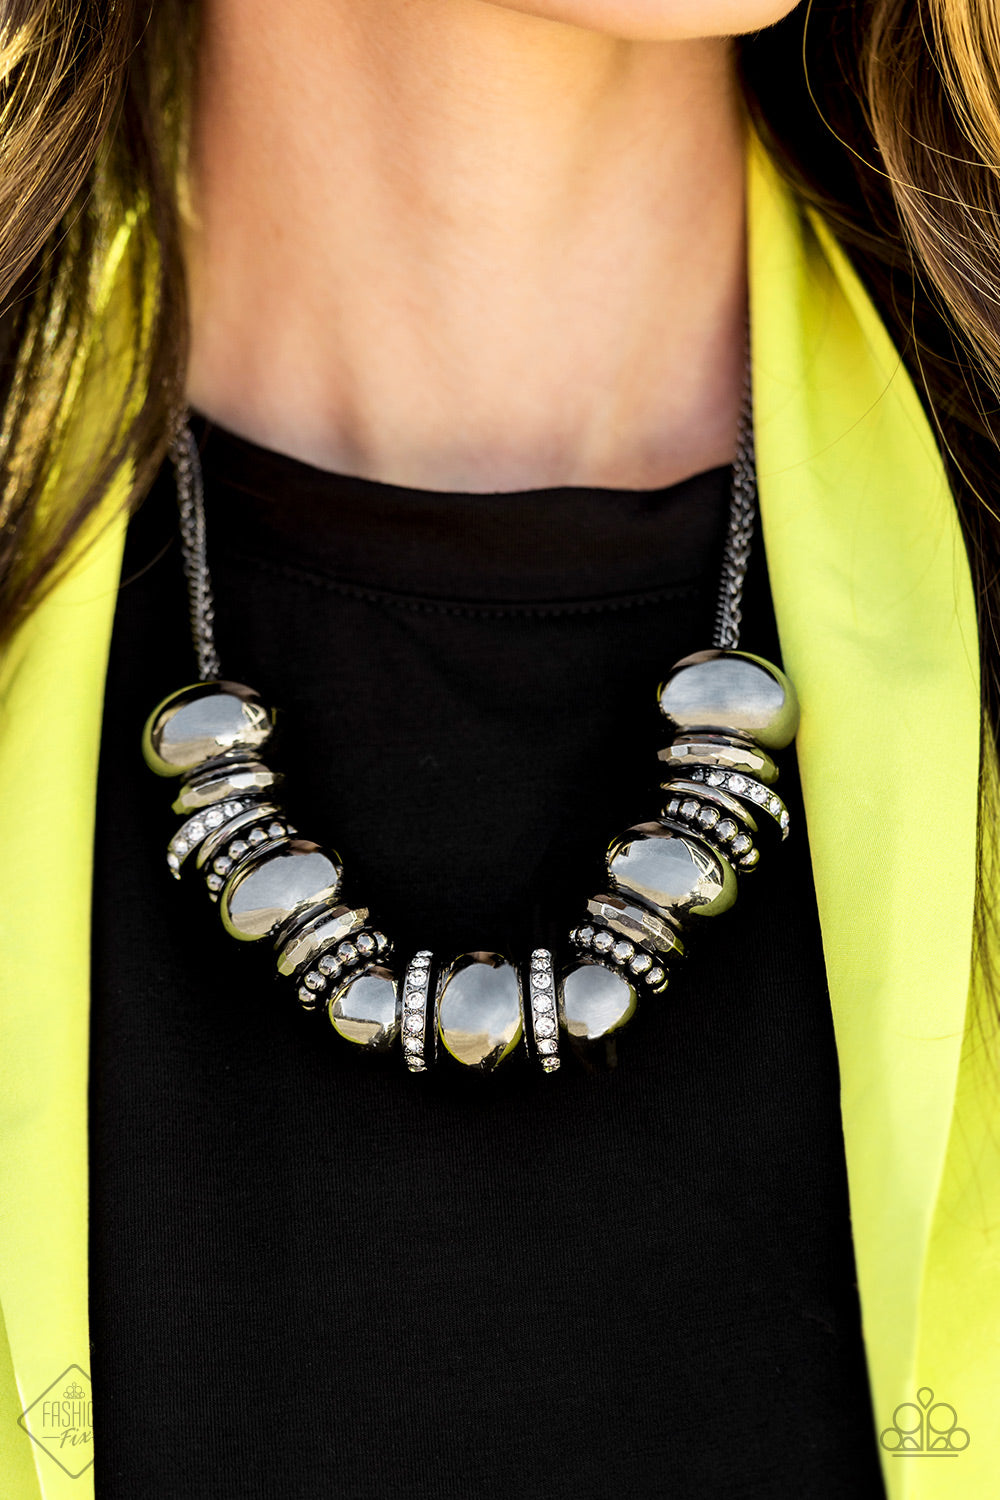 Paparazzi Only The Brave - Black Necklace - Trend Blend / Fashion Fix May 2020 - $5 Jewelry with Ashley Swint